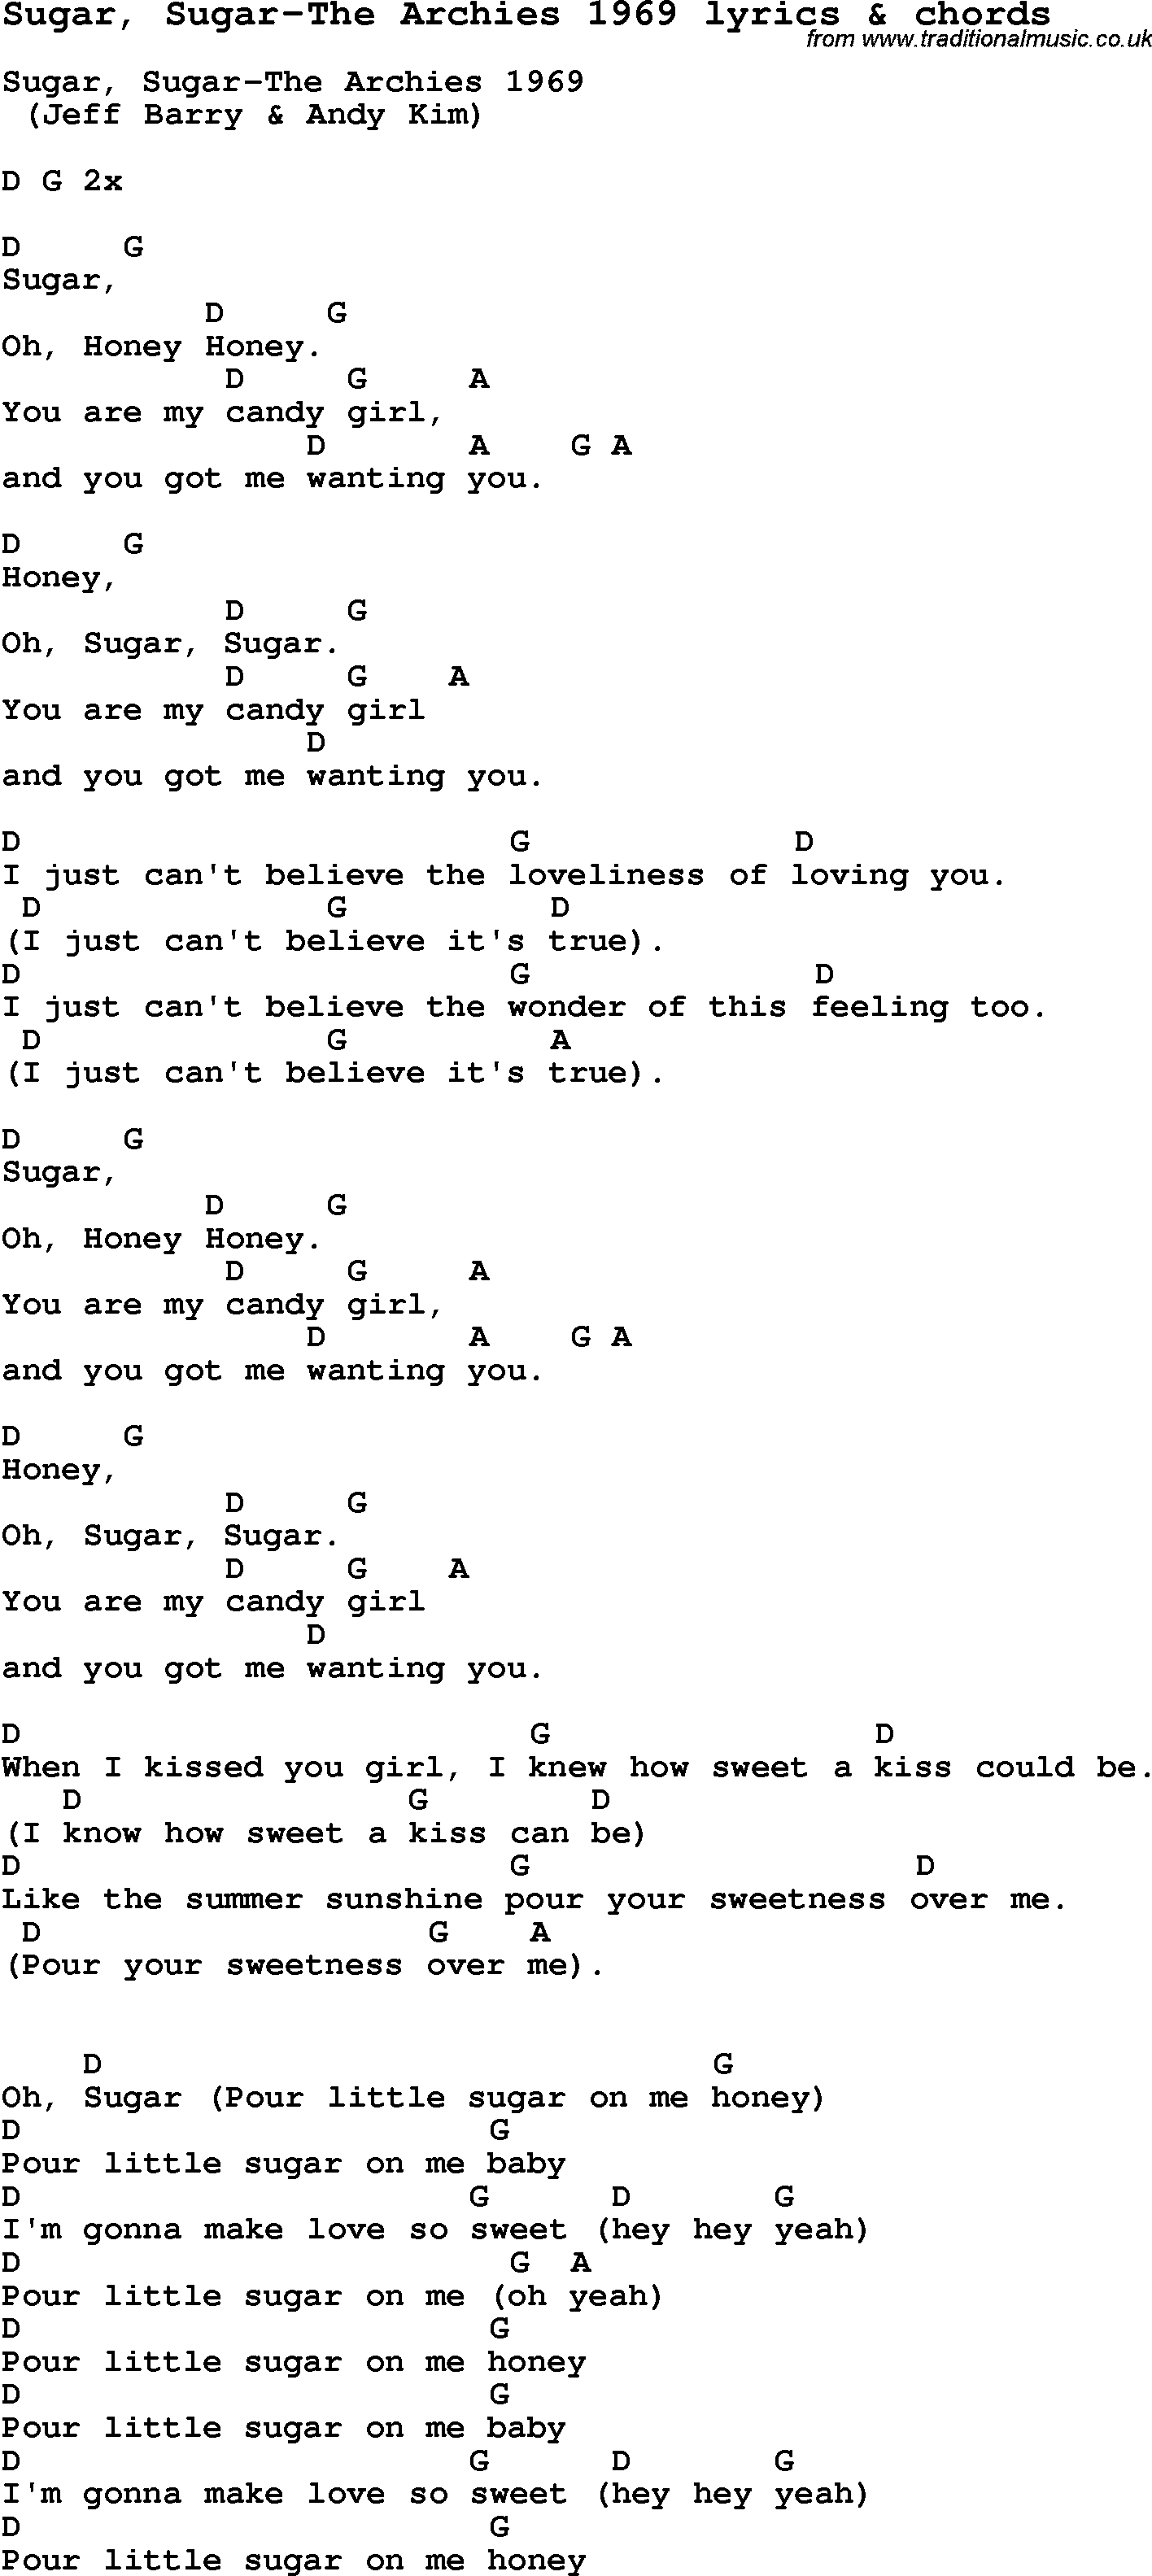 Love Song Lyrics for: Sugar, Sugar-The Archies 1969 with chords for Ukulele, Guitar Banjo etc.